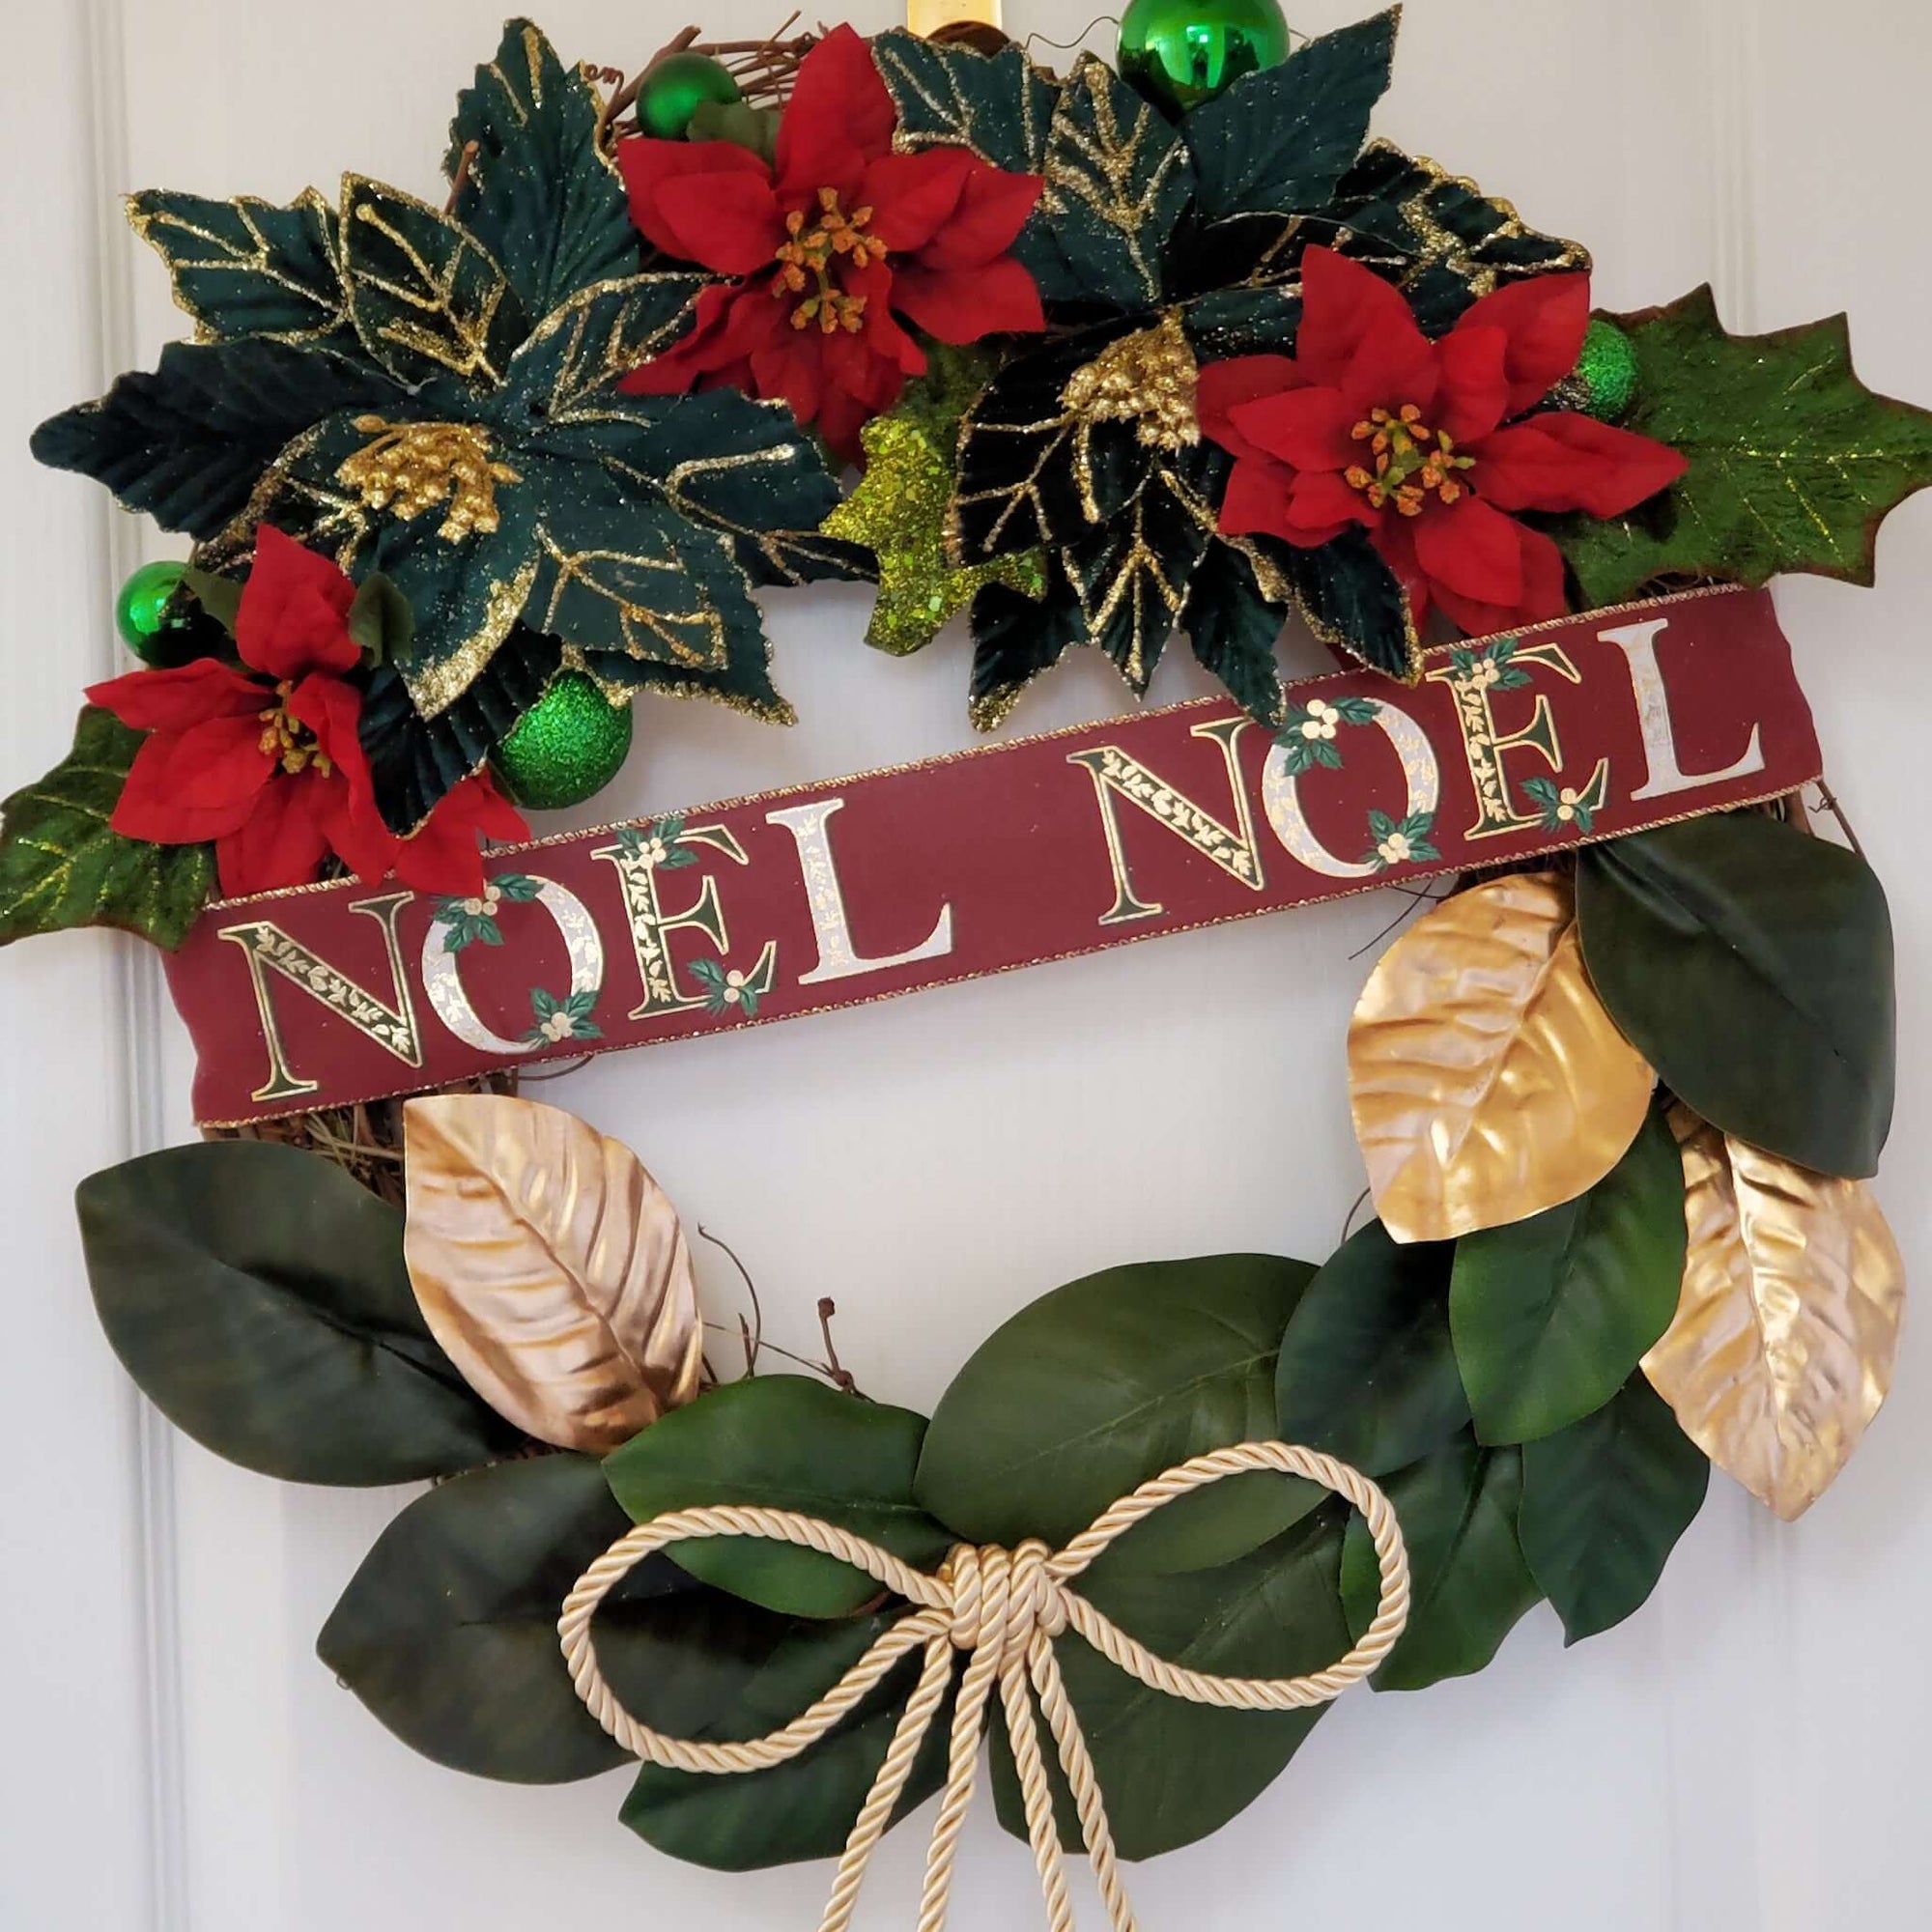 Grapevine Wreath with a NOEL banner Ribbon